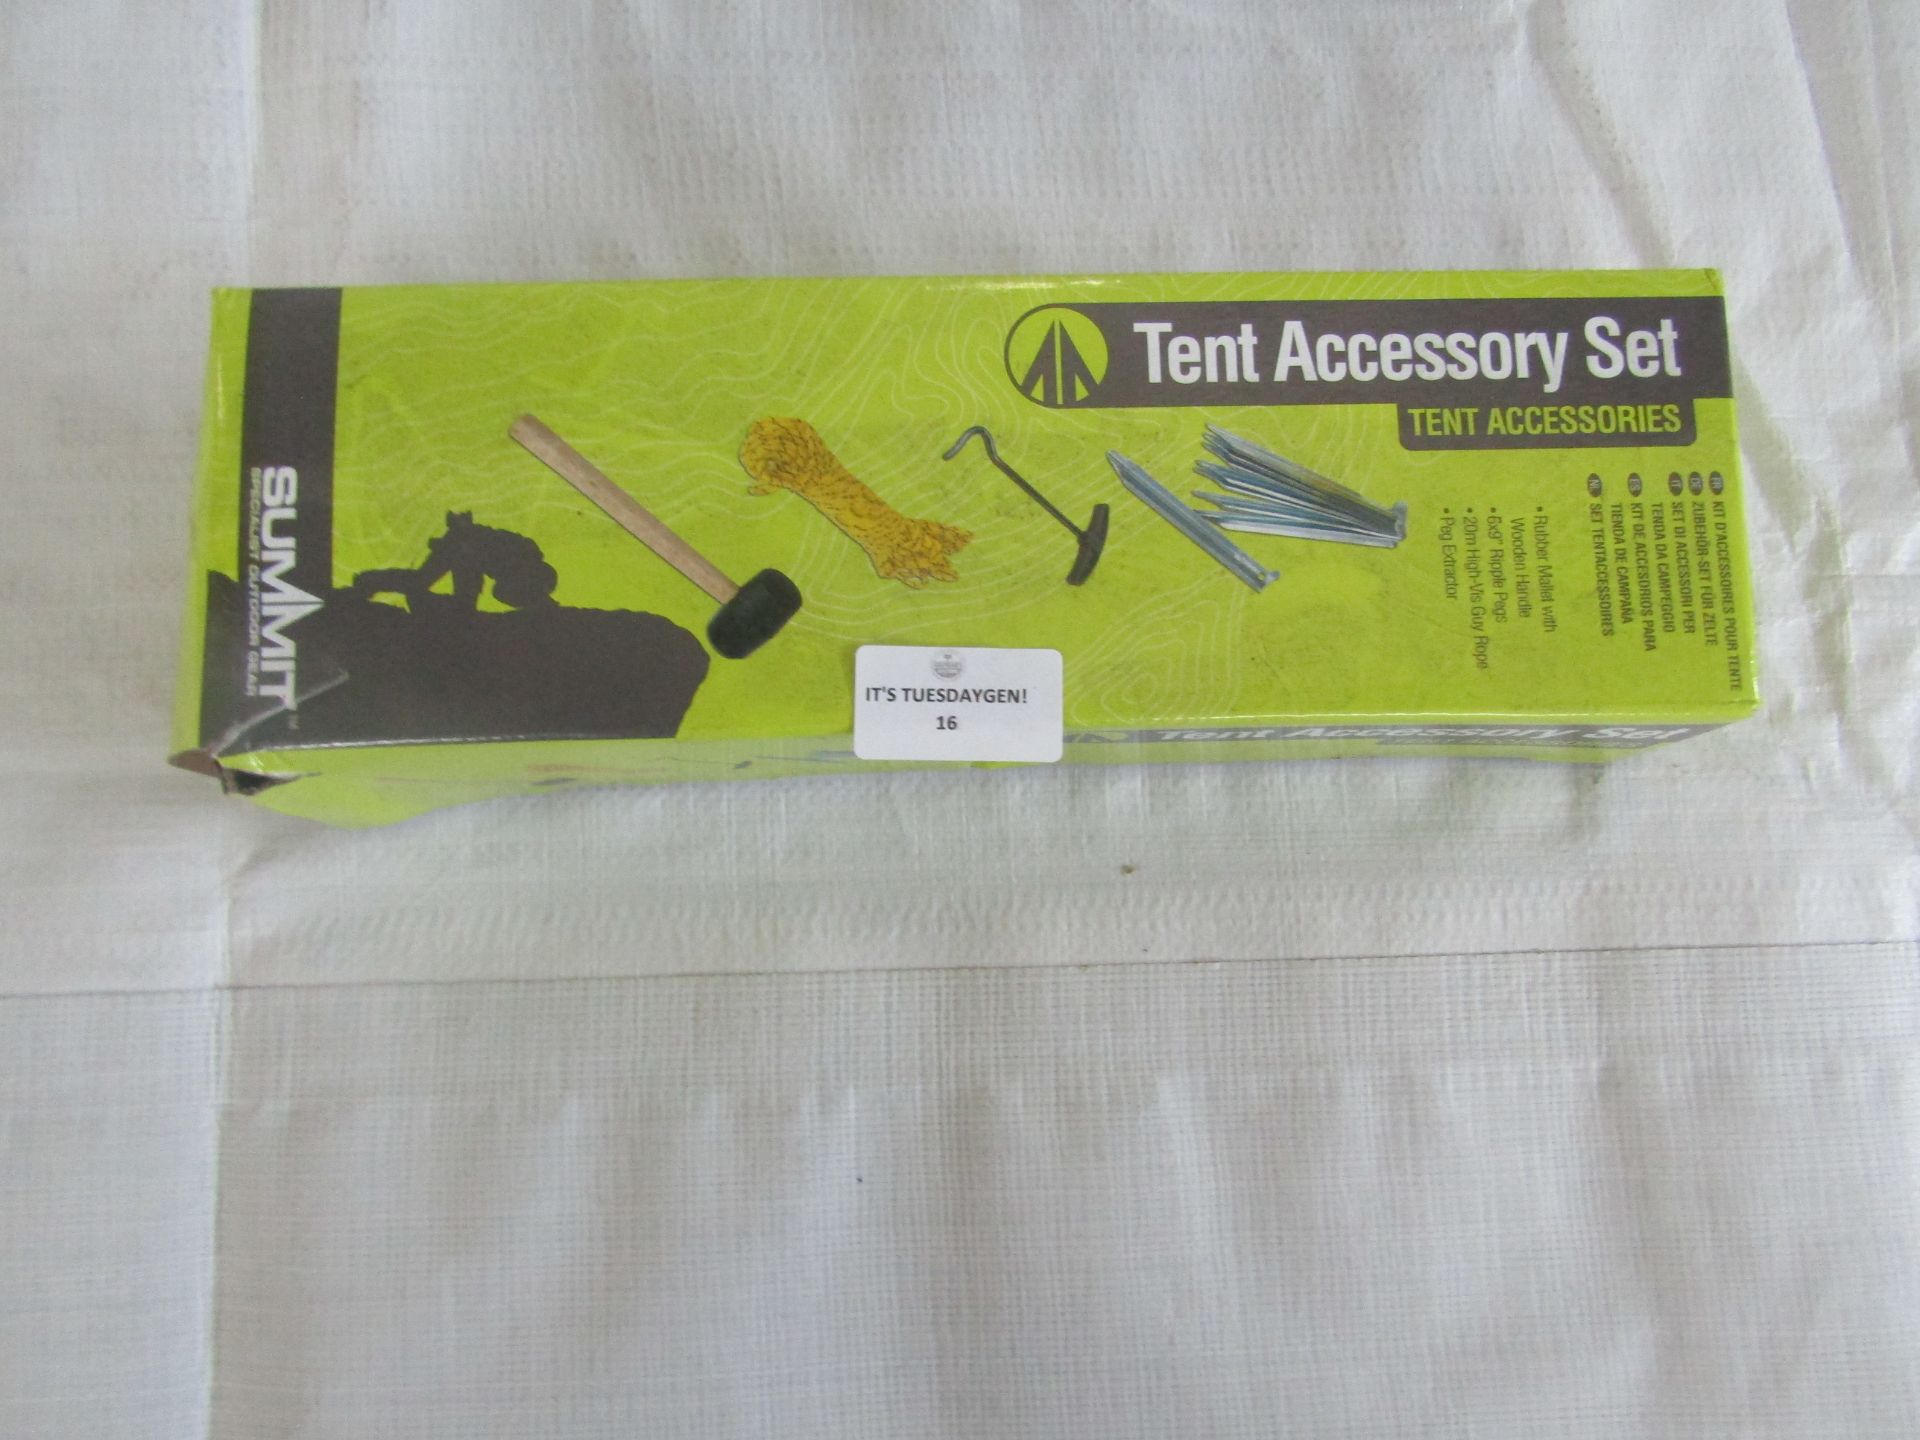 Summit - Tent Accessory Set - Boxed.